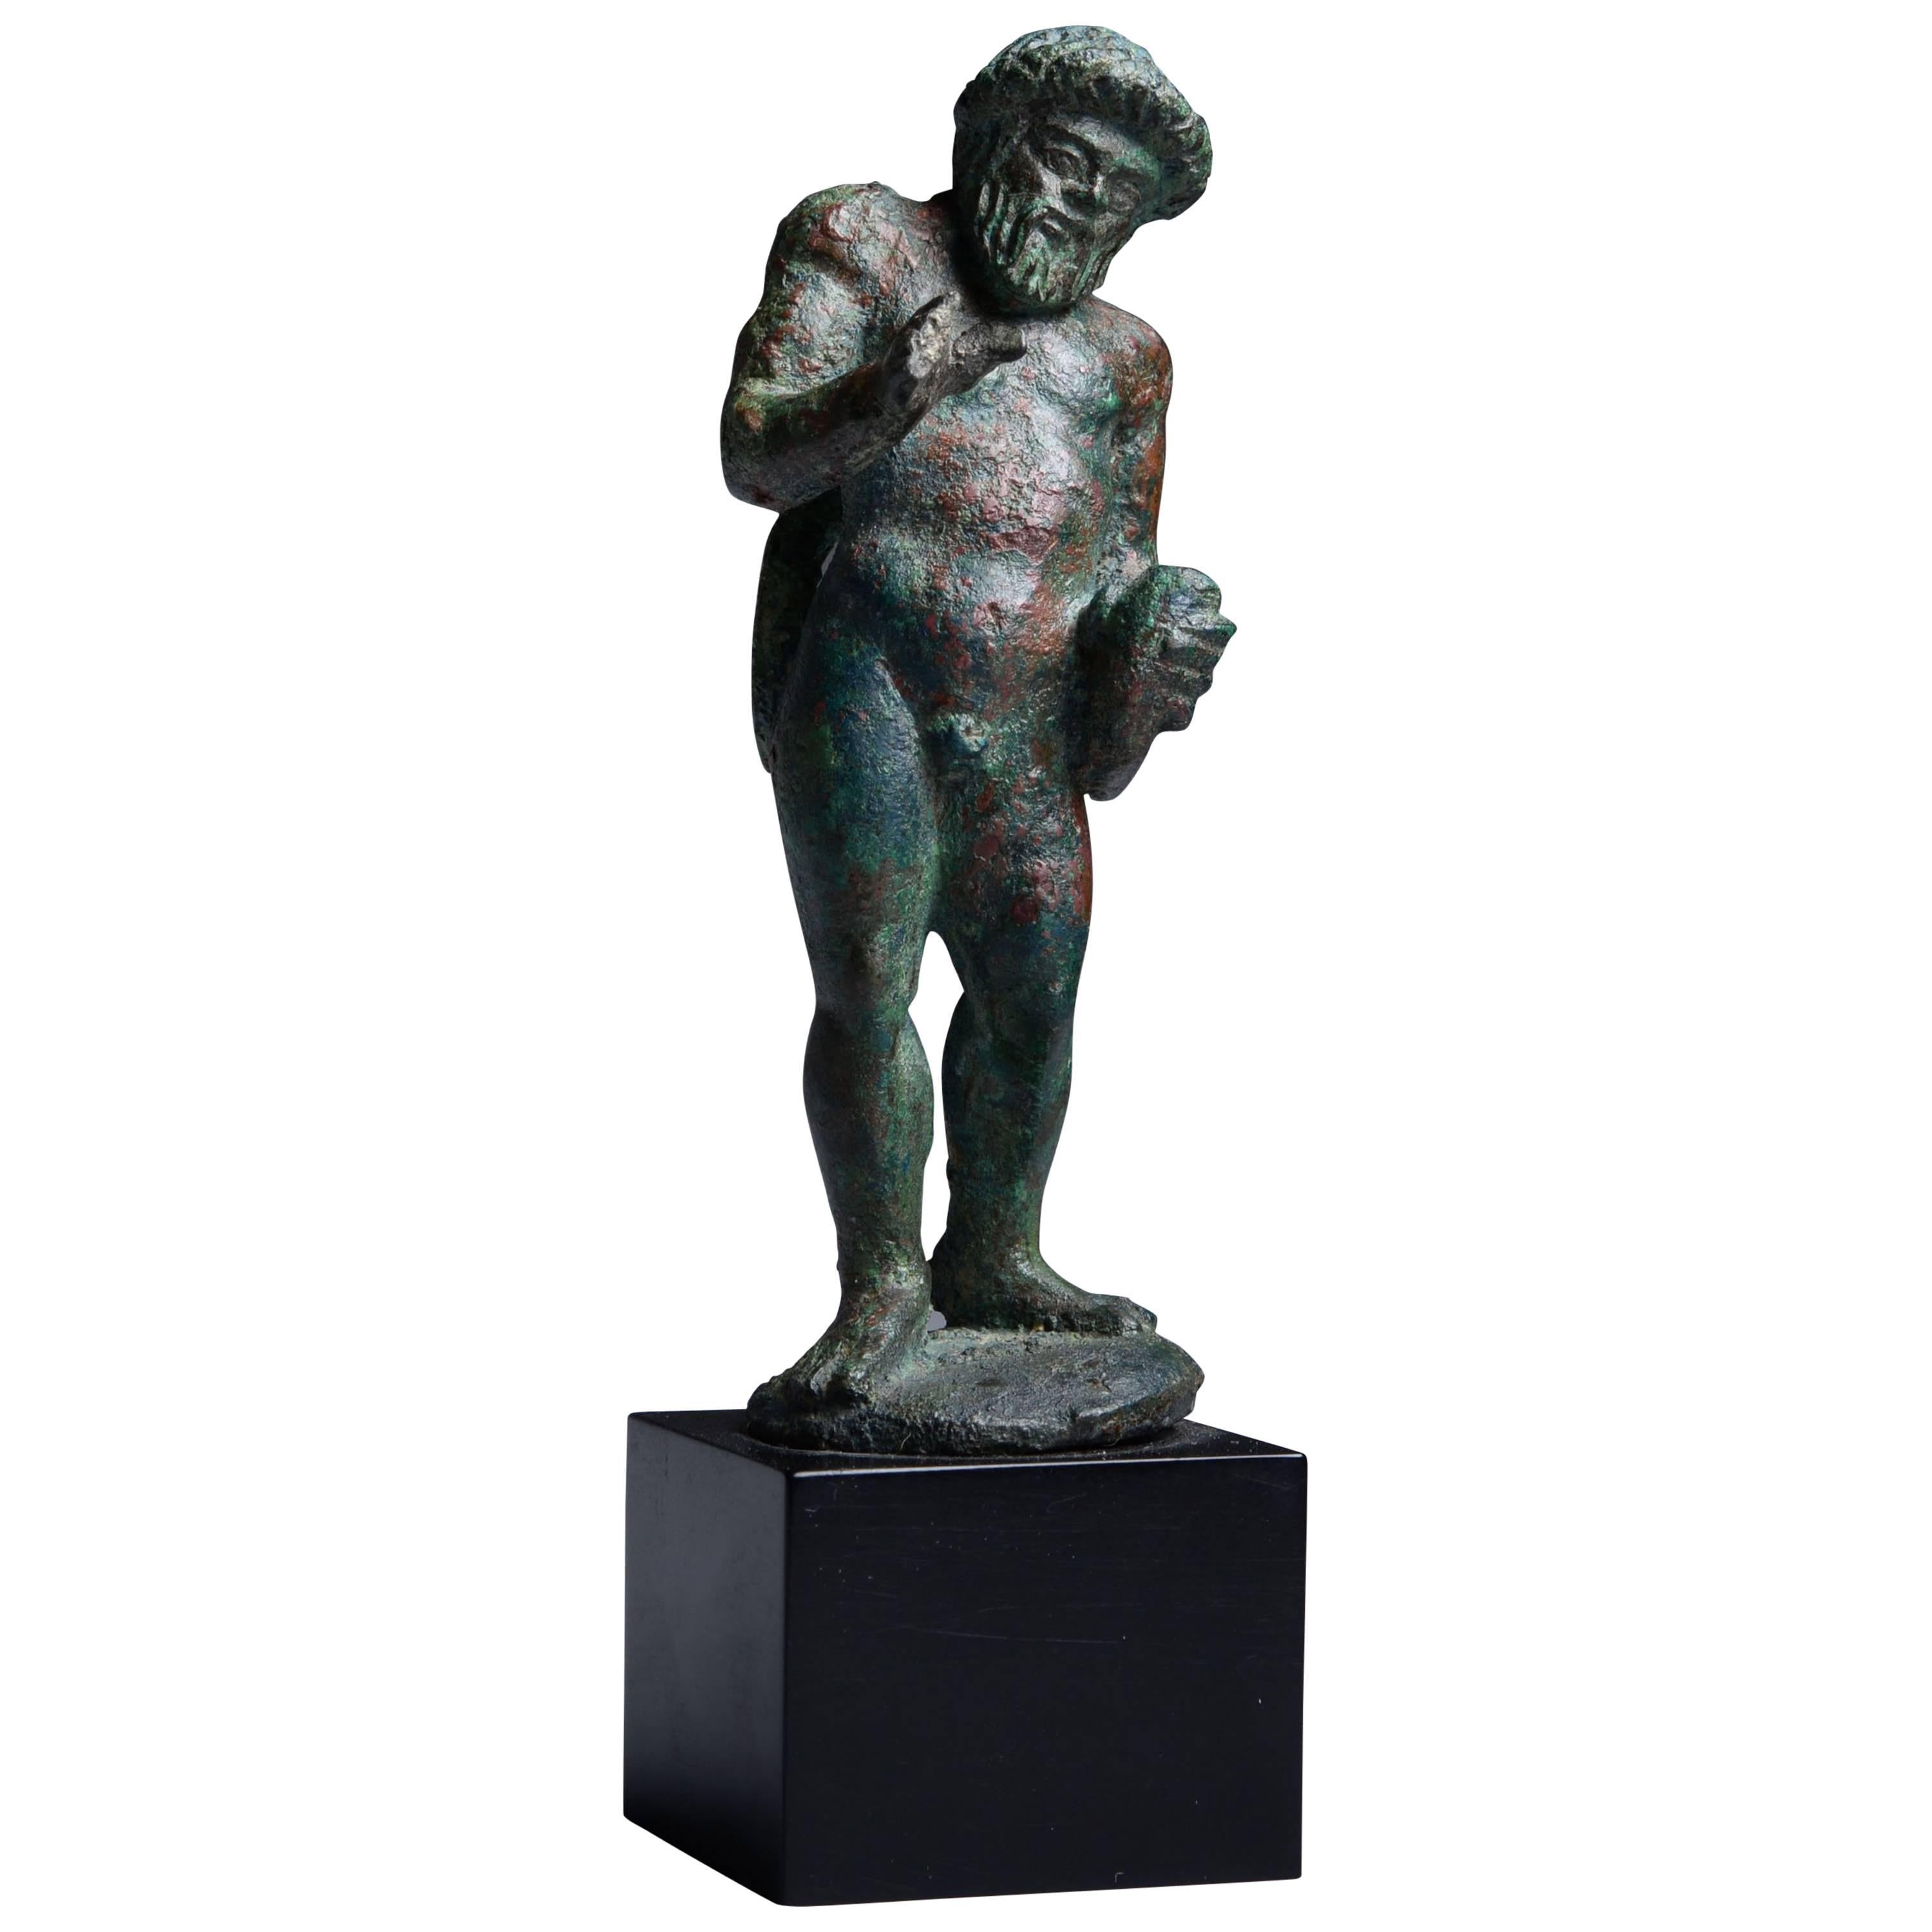 Etruscan Bronze Statuette of a Drunk Satyr, 450 BC